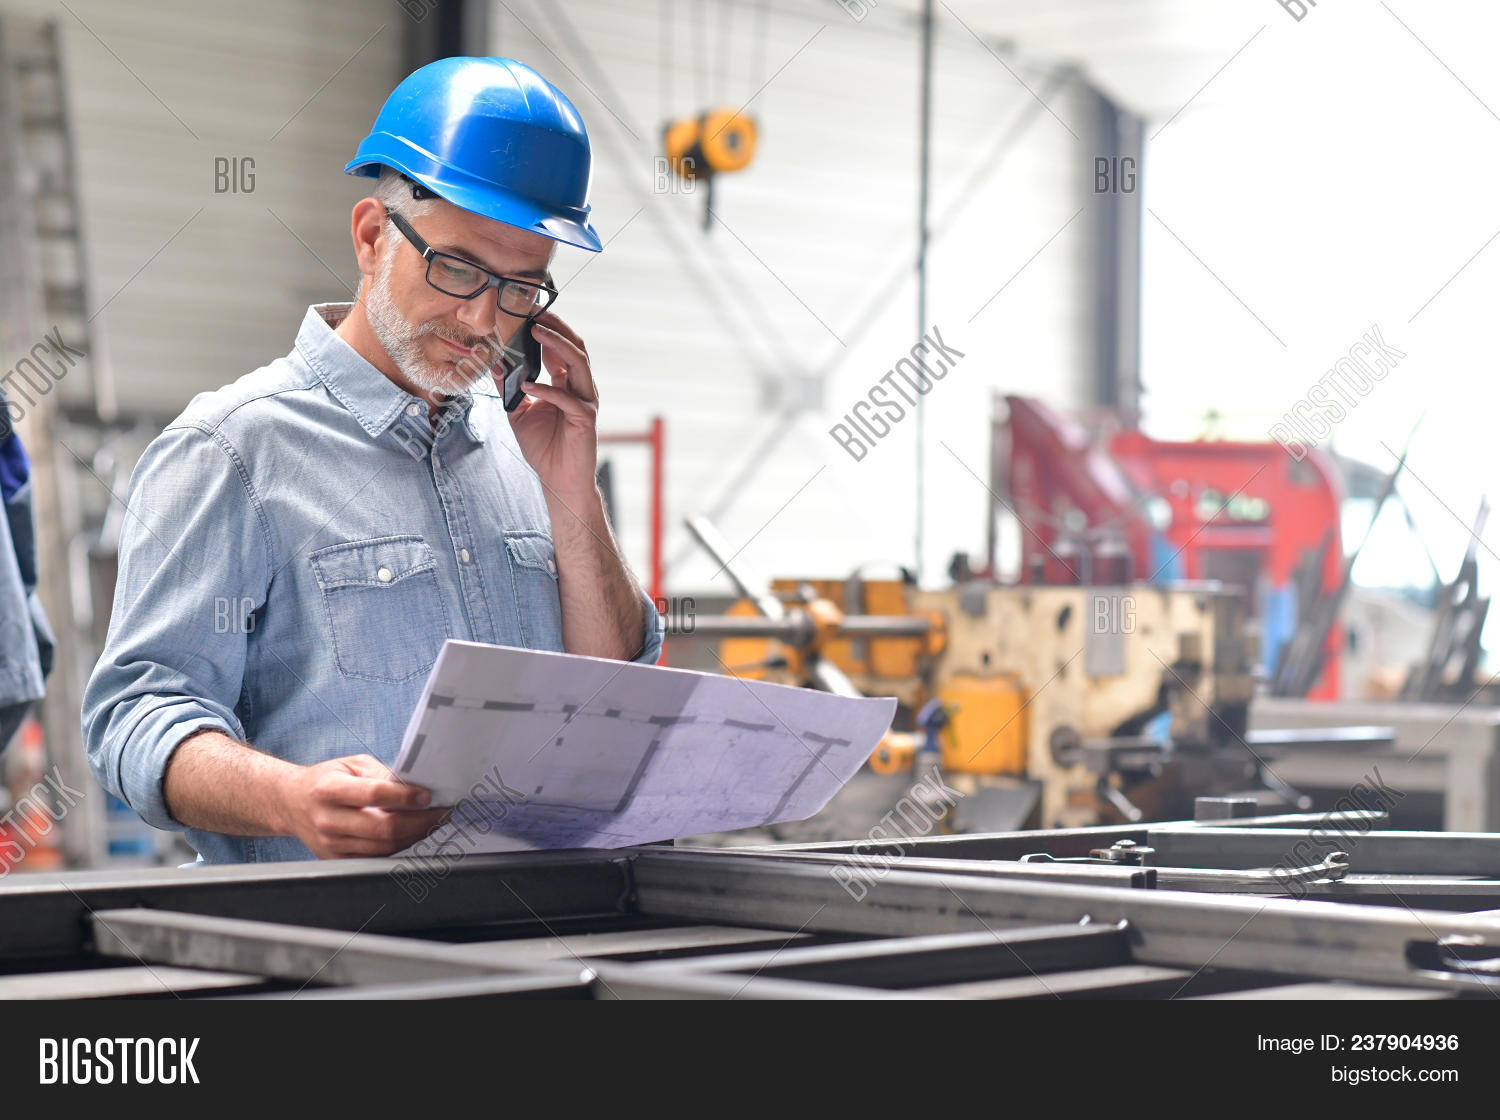 immigrating to Canada as a metallurgical engineer